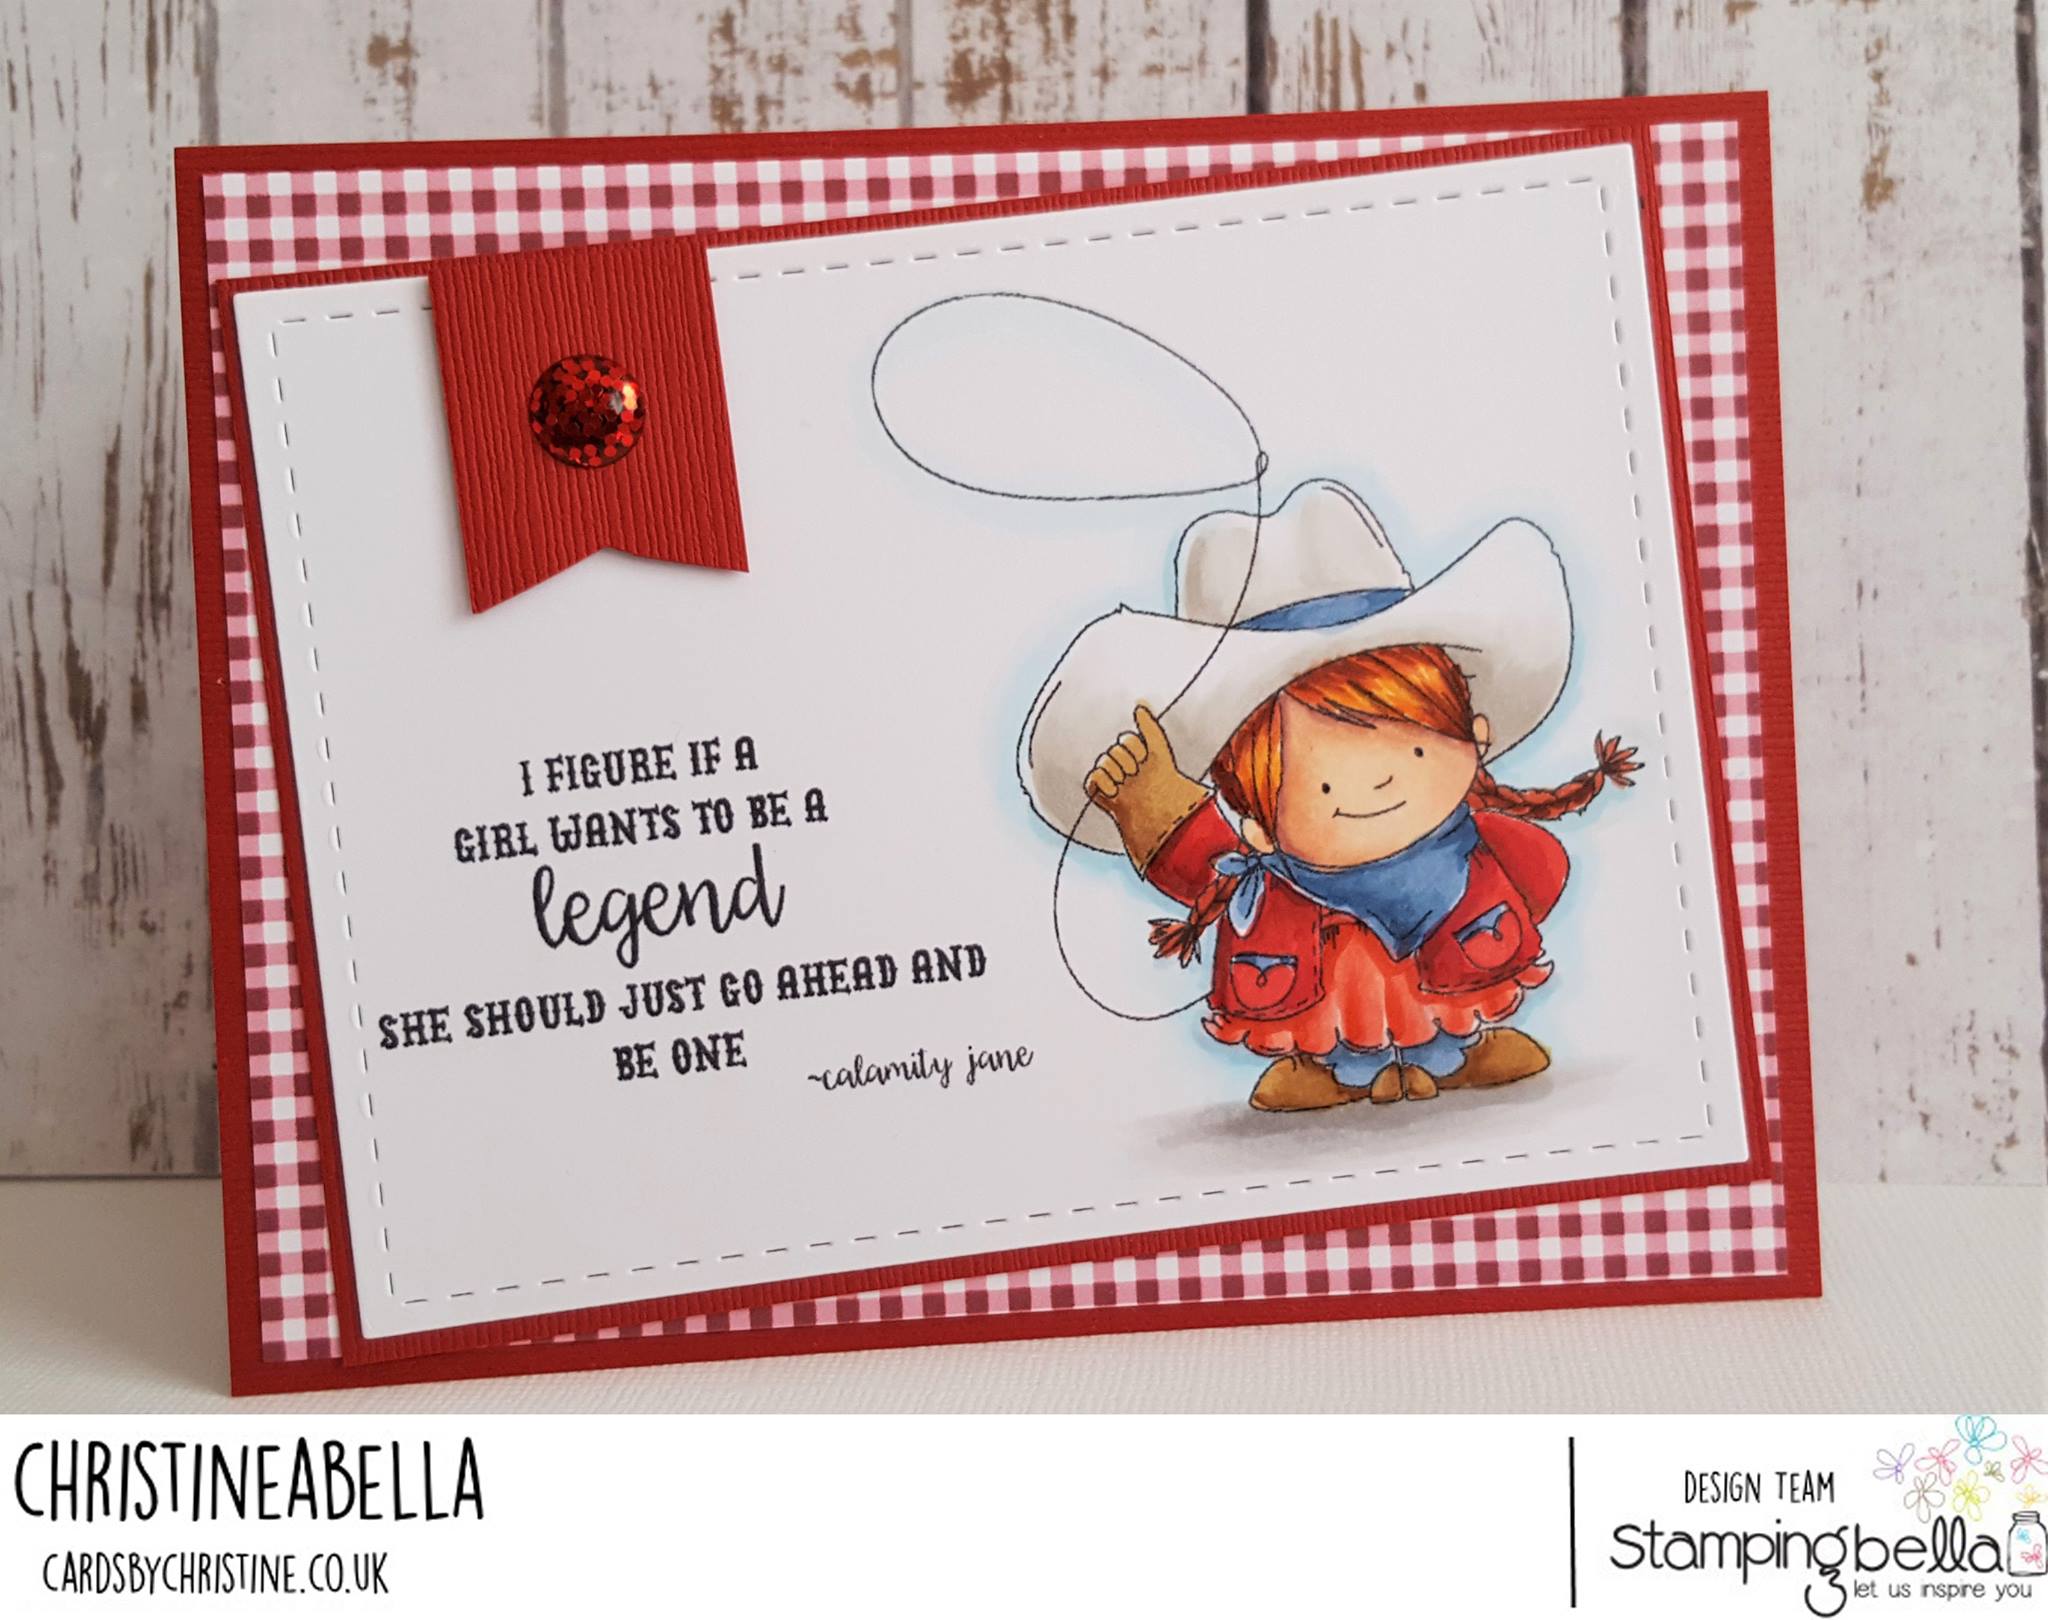 www.stampingbella.com: rubber stamp used: COWGIRL SQUIDGY  card by Christine Levison